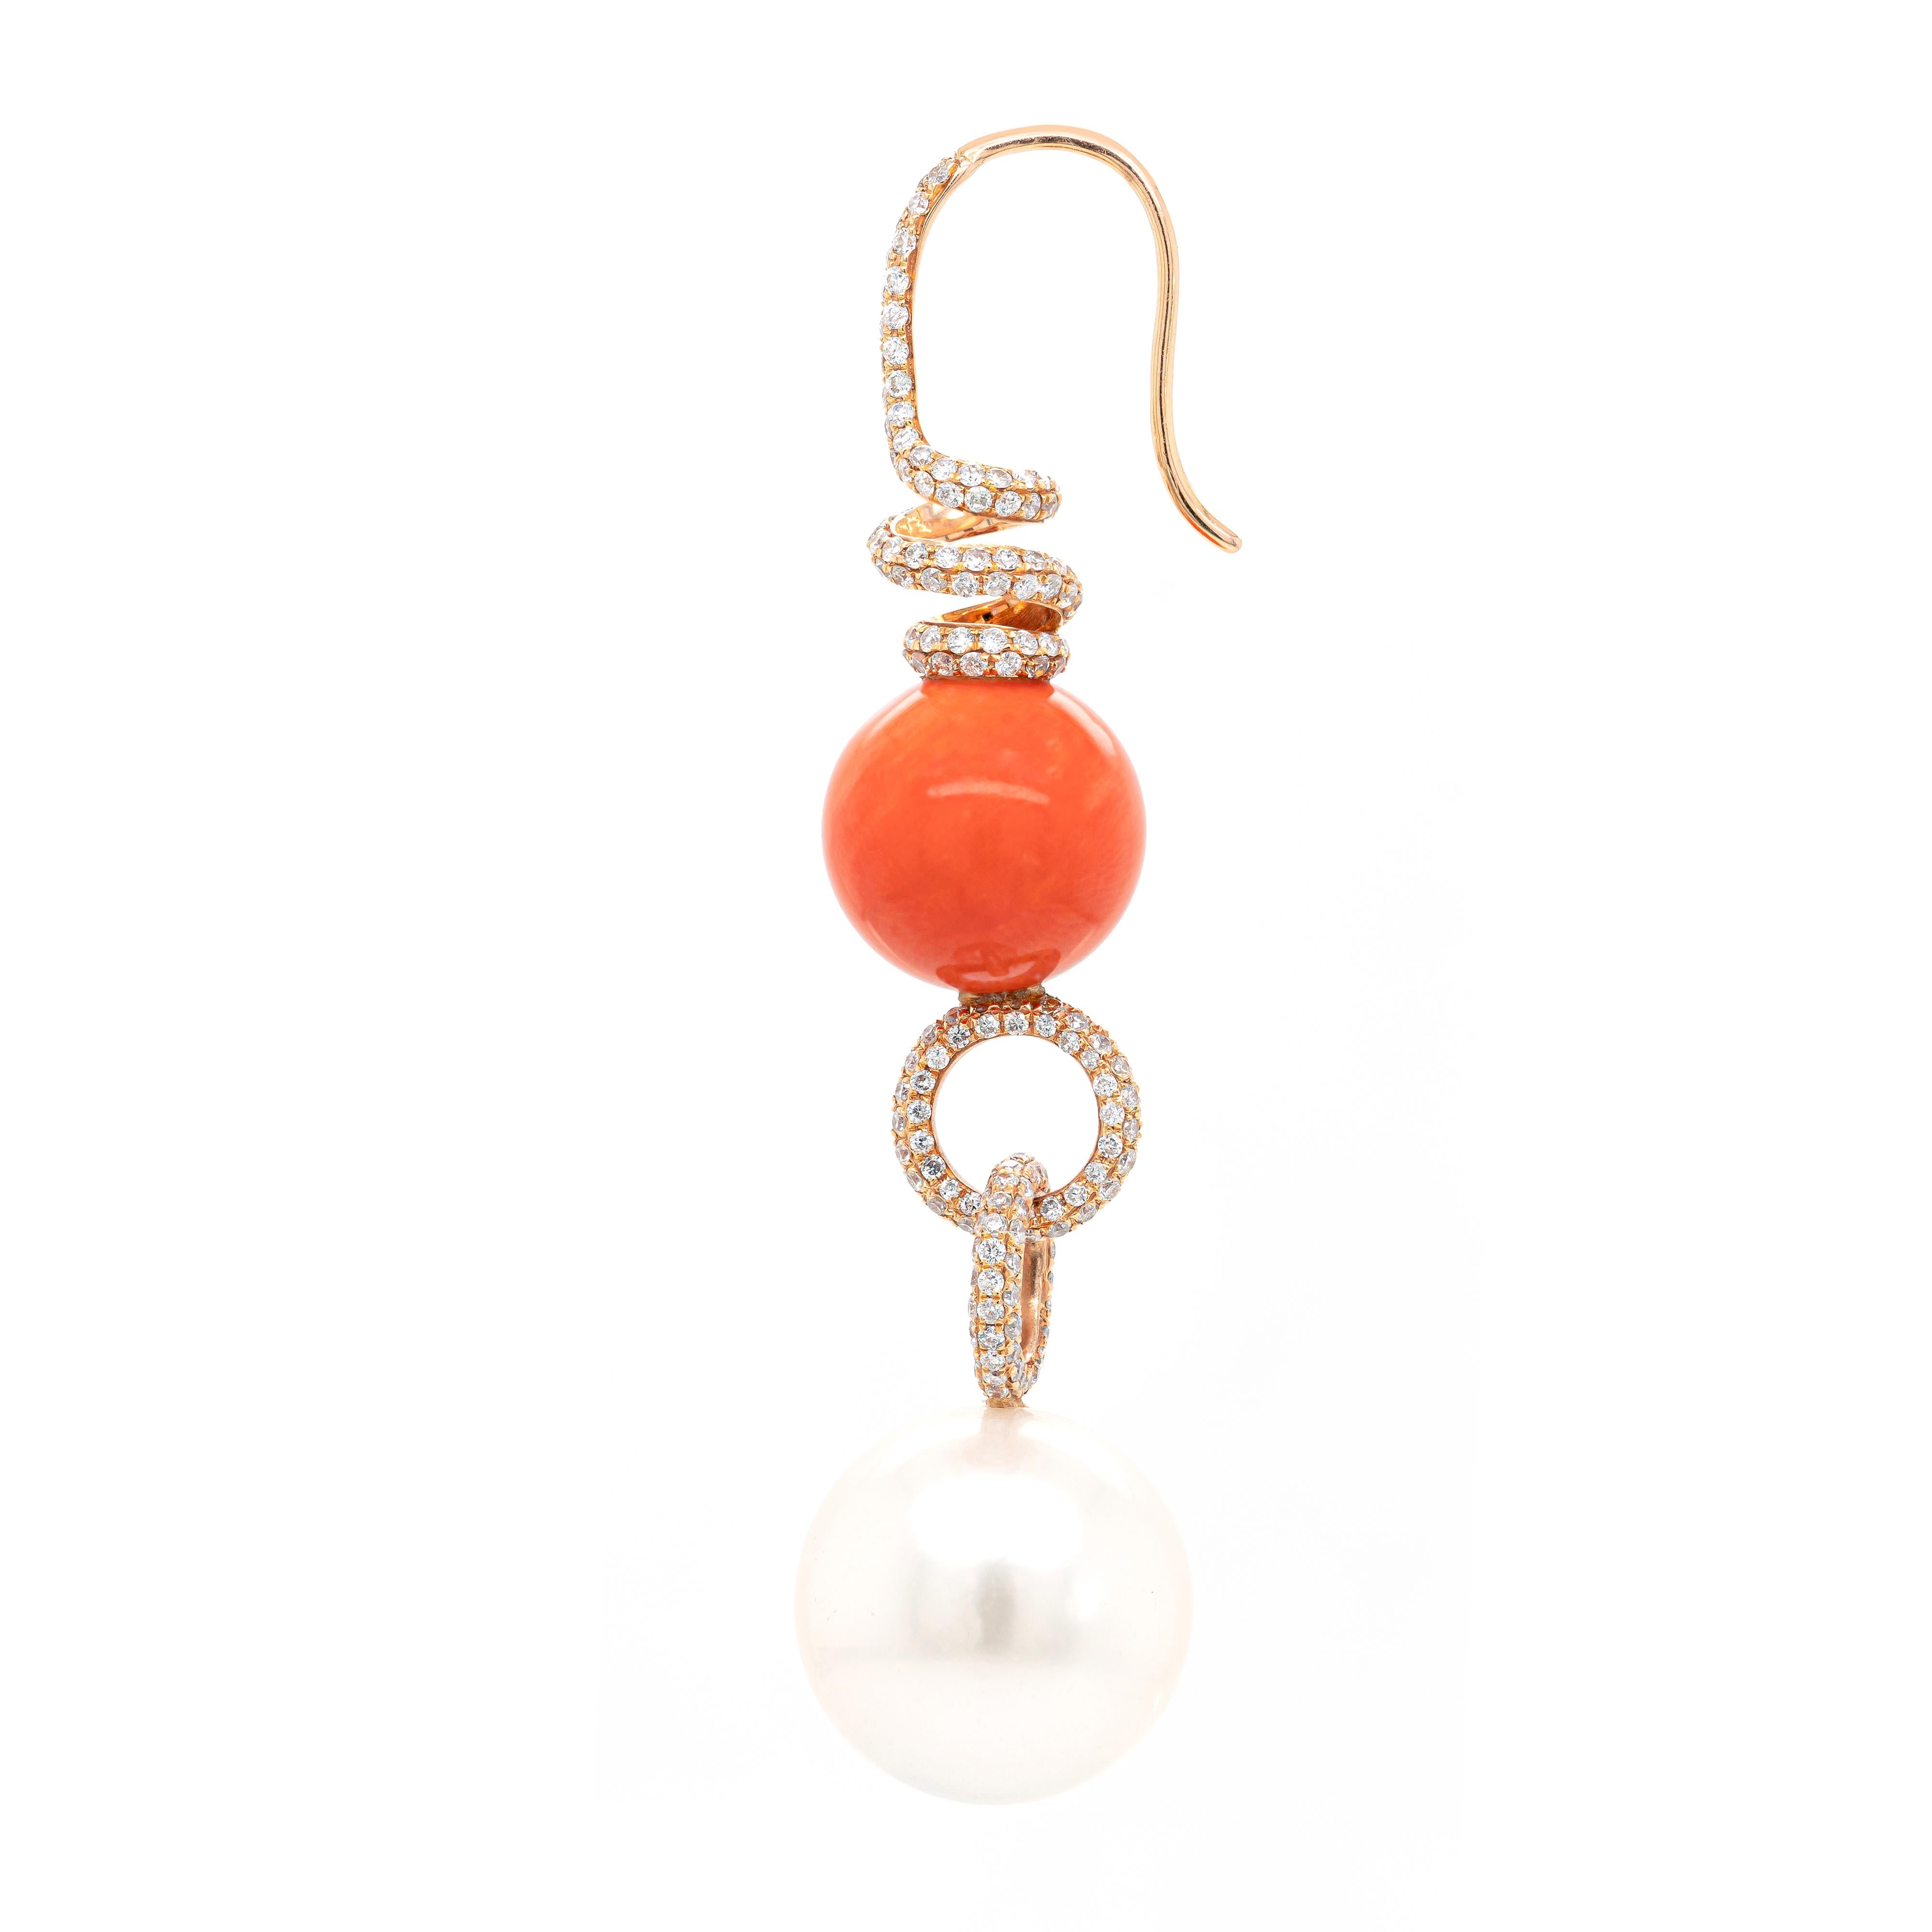 These gorgeous 18 carat rose gold drop earrings feature a round coral bead measuring 11.7mm and a cultured South Sea pearl measuring 14.4mm, which are beautifully connected by two rose gold circles micro set with round brilliant cut diamonds. The